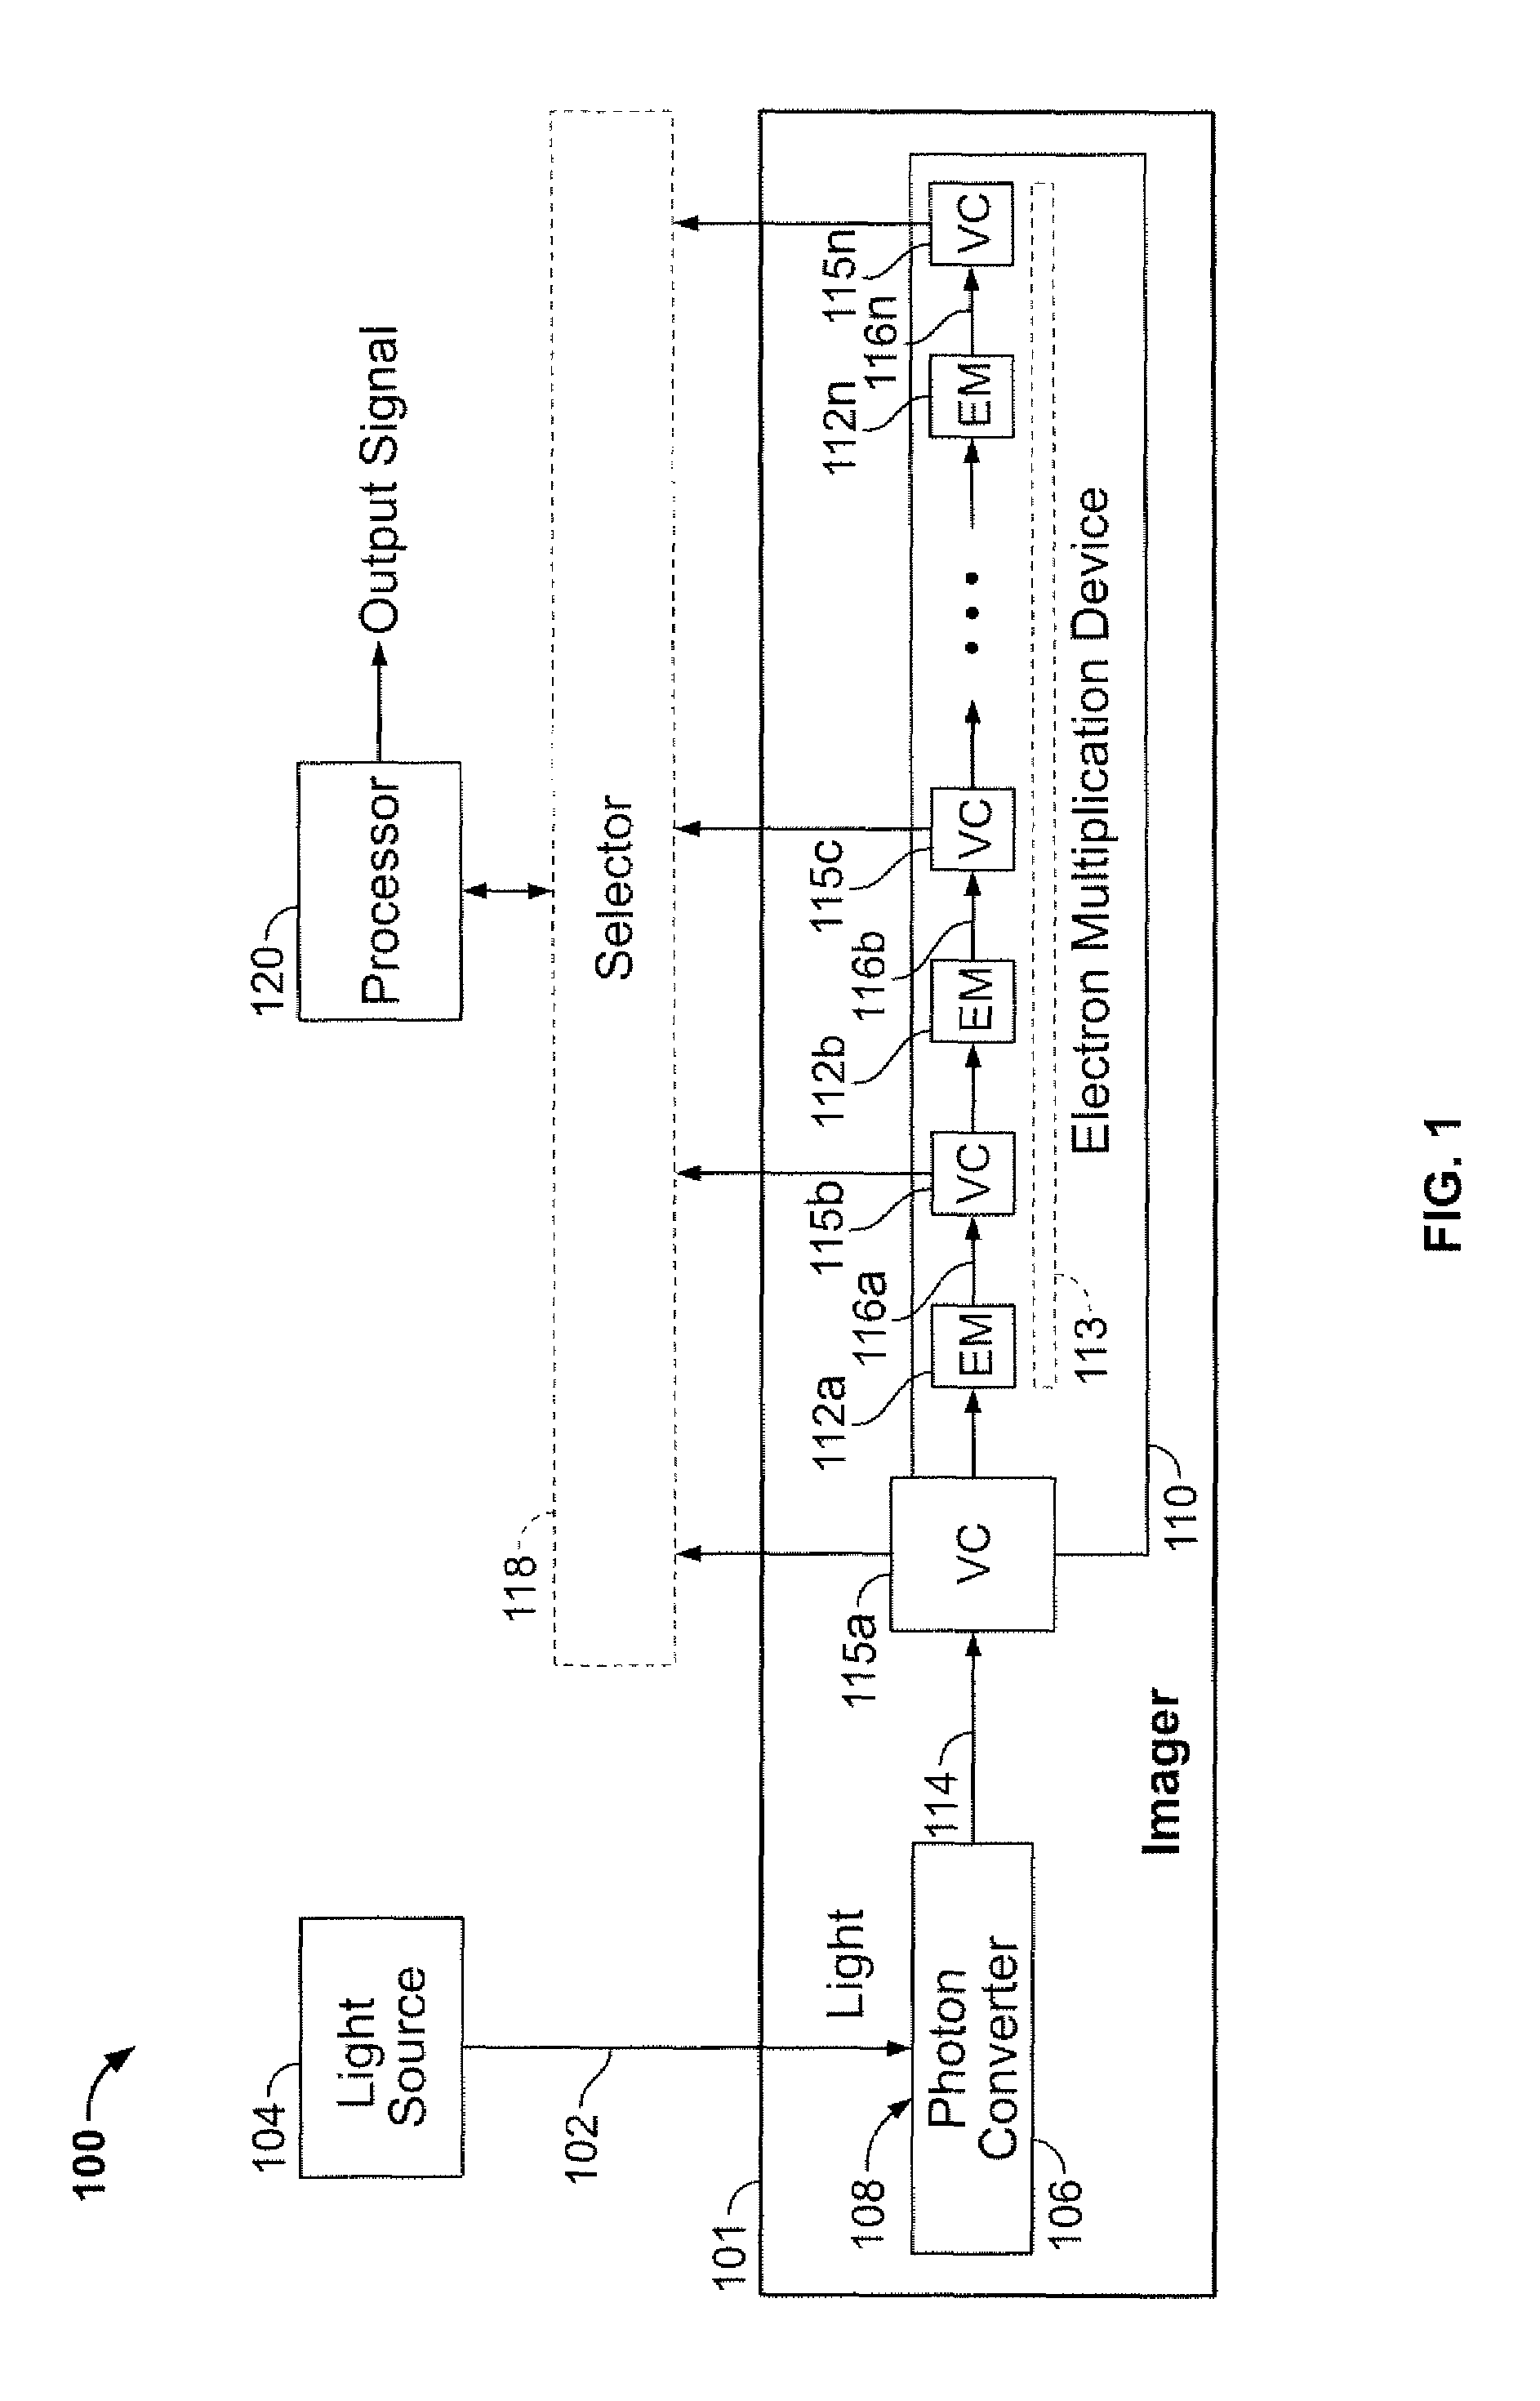 Imaging methods and apparatus having extended dynamic range